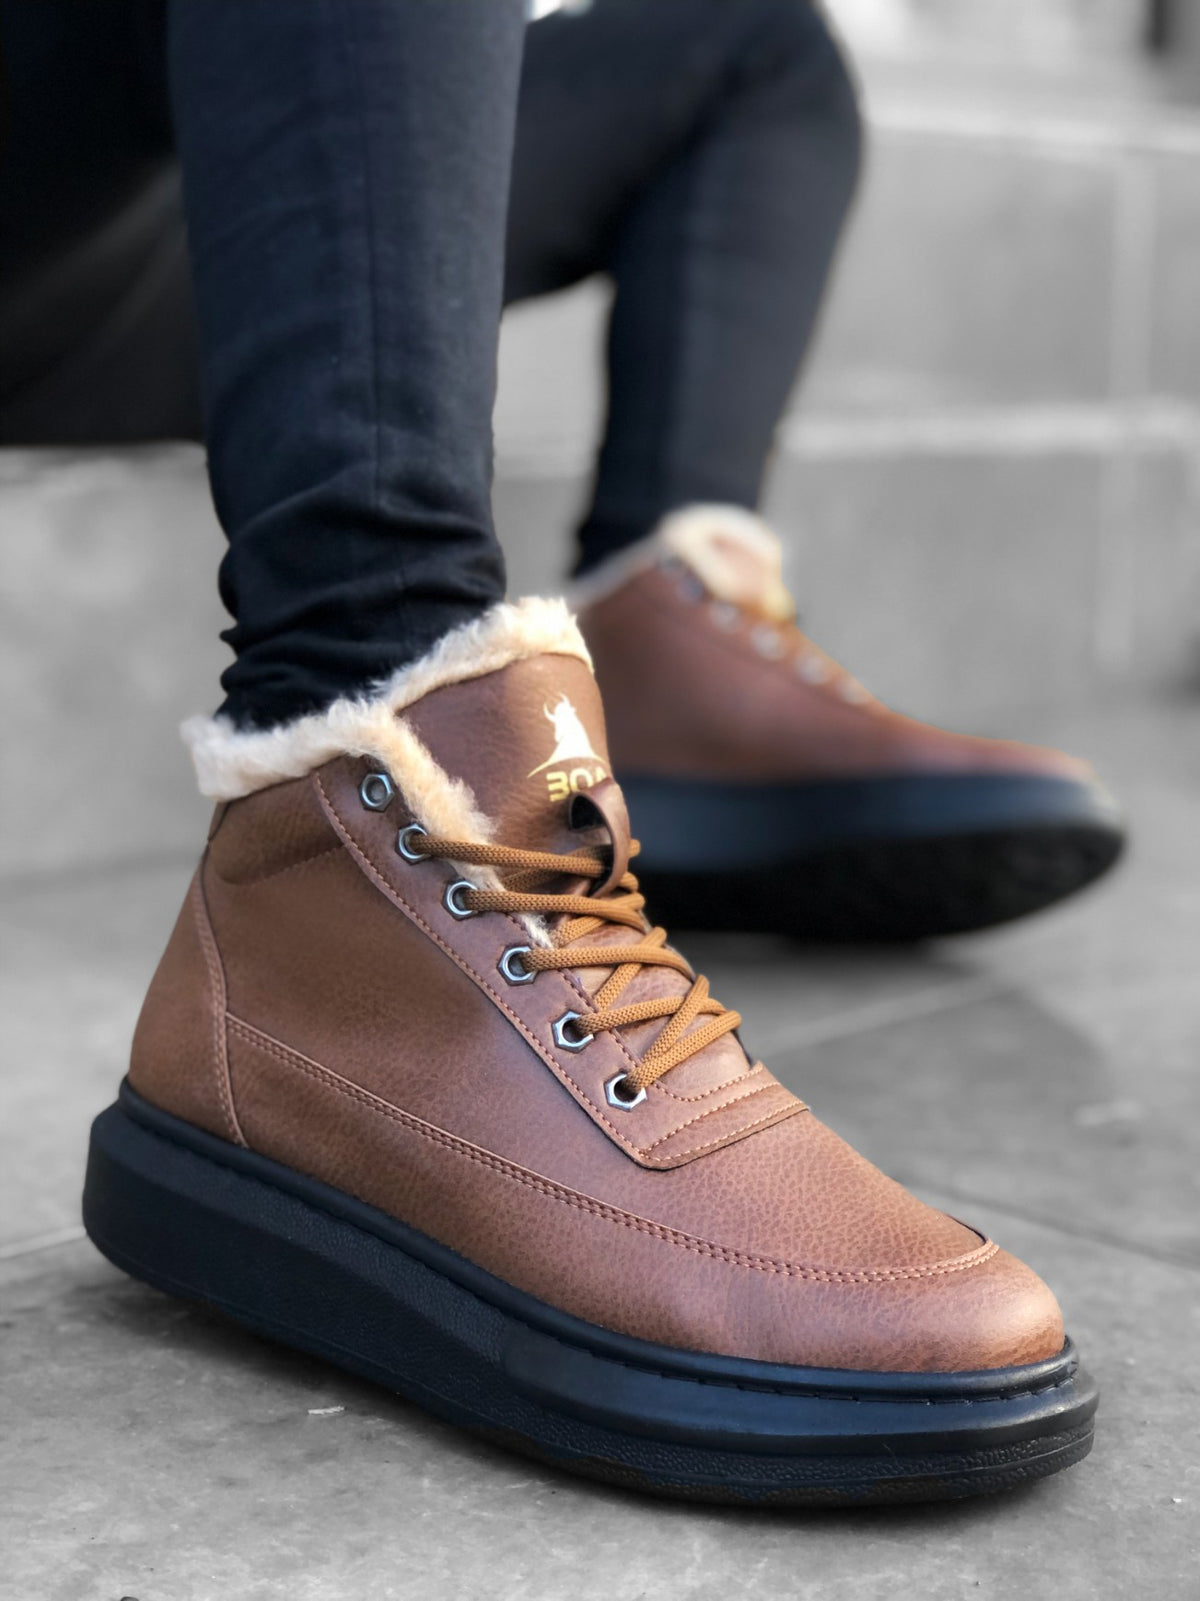 BA0151 Shearling Lace-up Tan Men's Style Sport Boots - STREETMODE ™